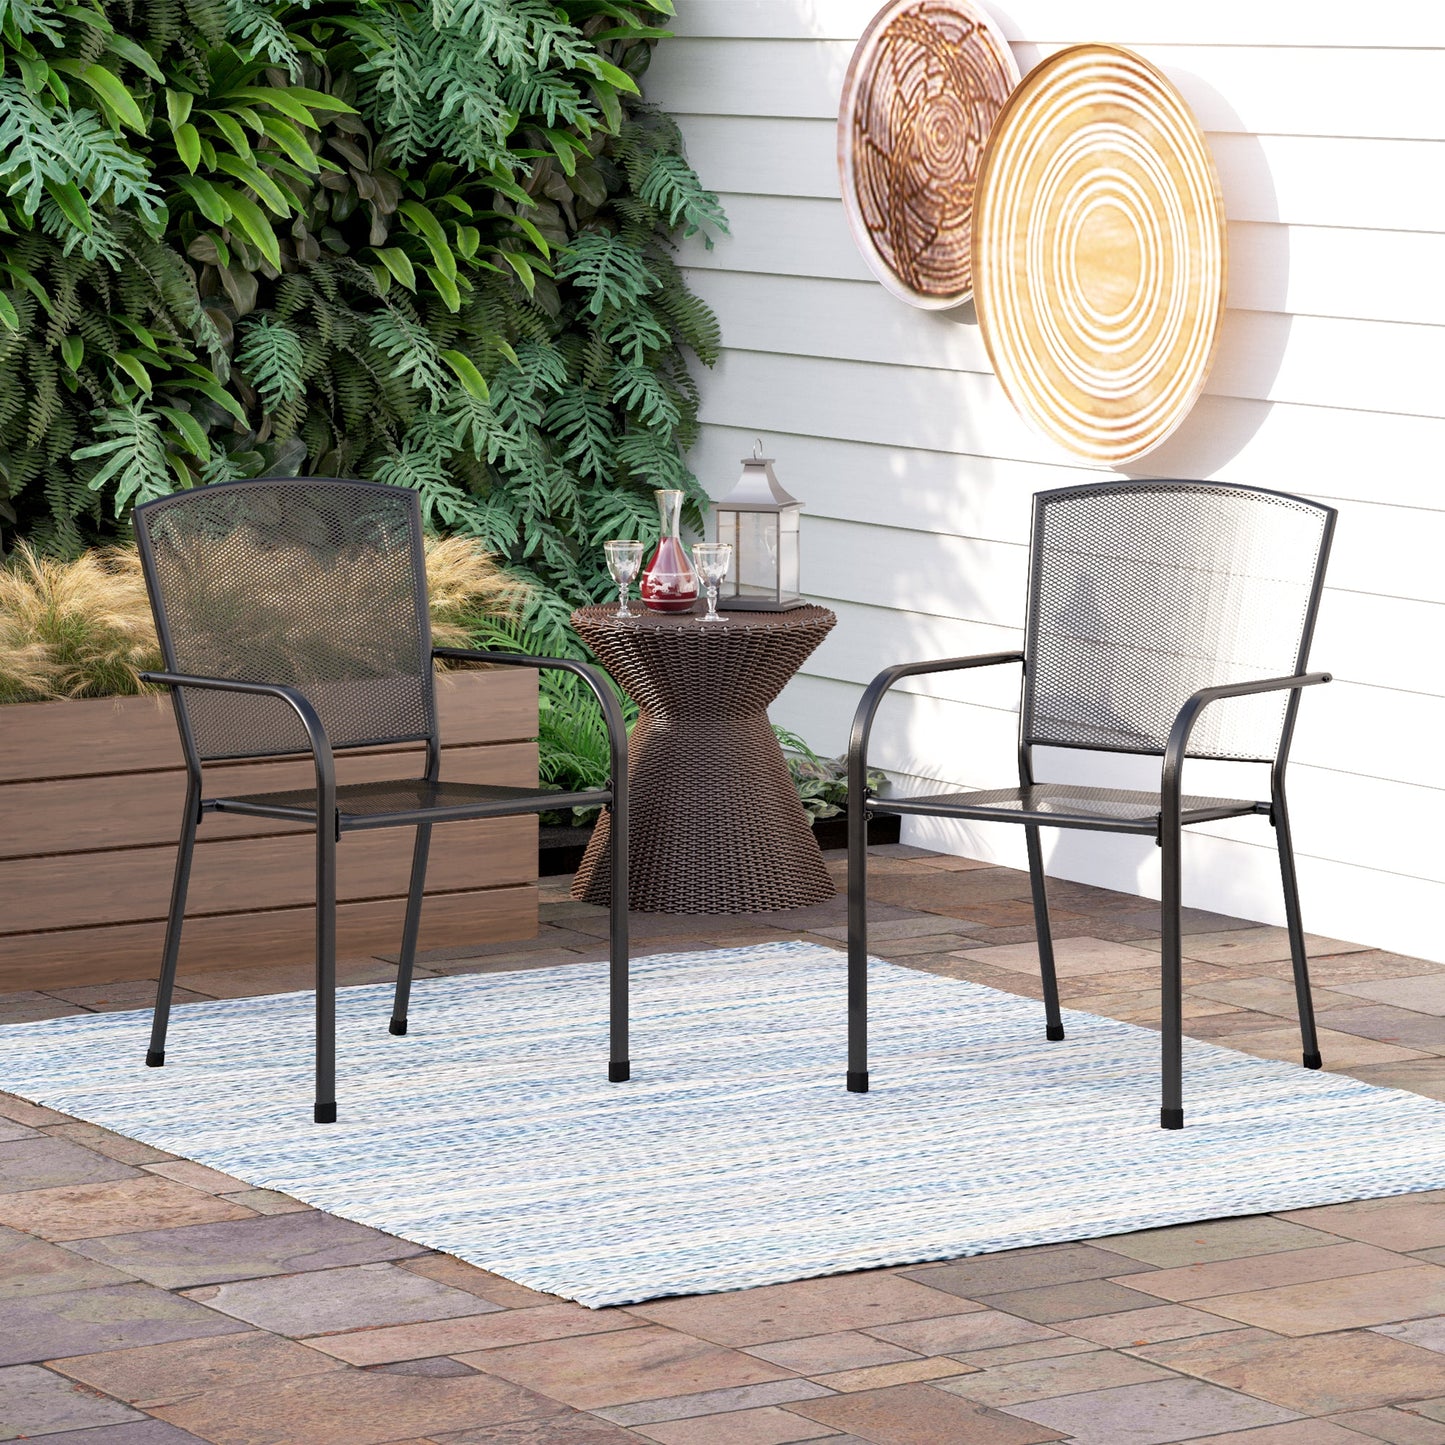 Outdoor Dining Chairs Stacking Garden Chairs Set of 2